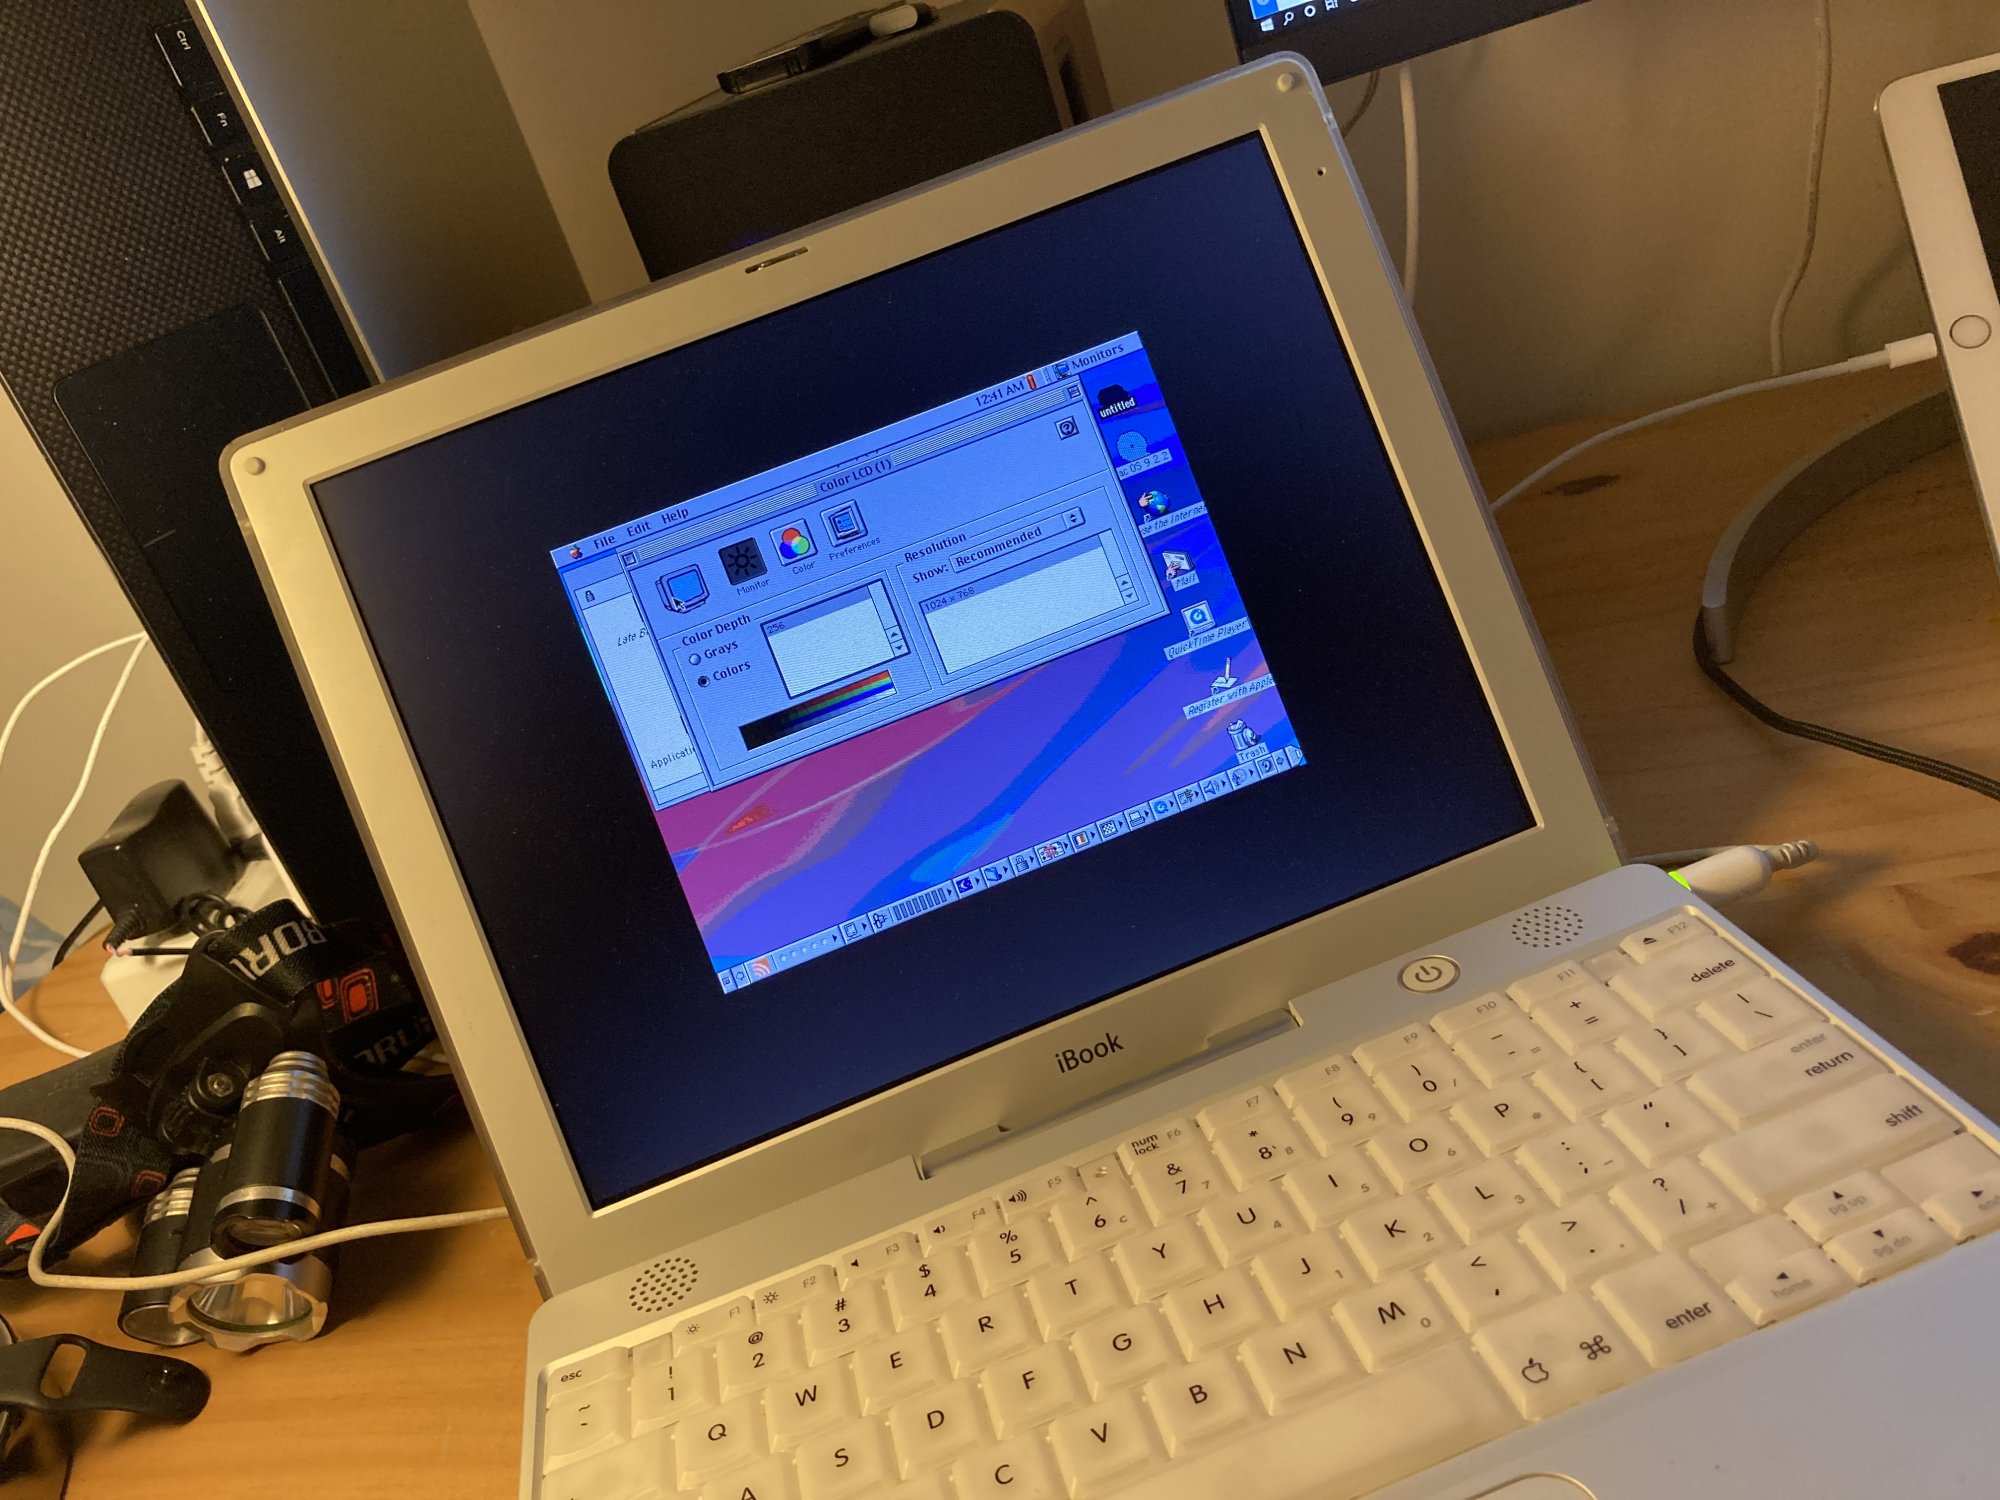 Installing Mac OS 9 on an iBook G3 800mhz from a USB Flash Drive 